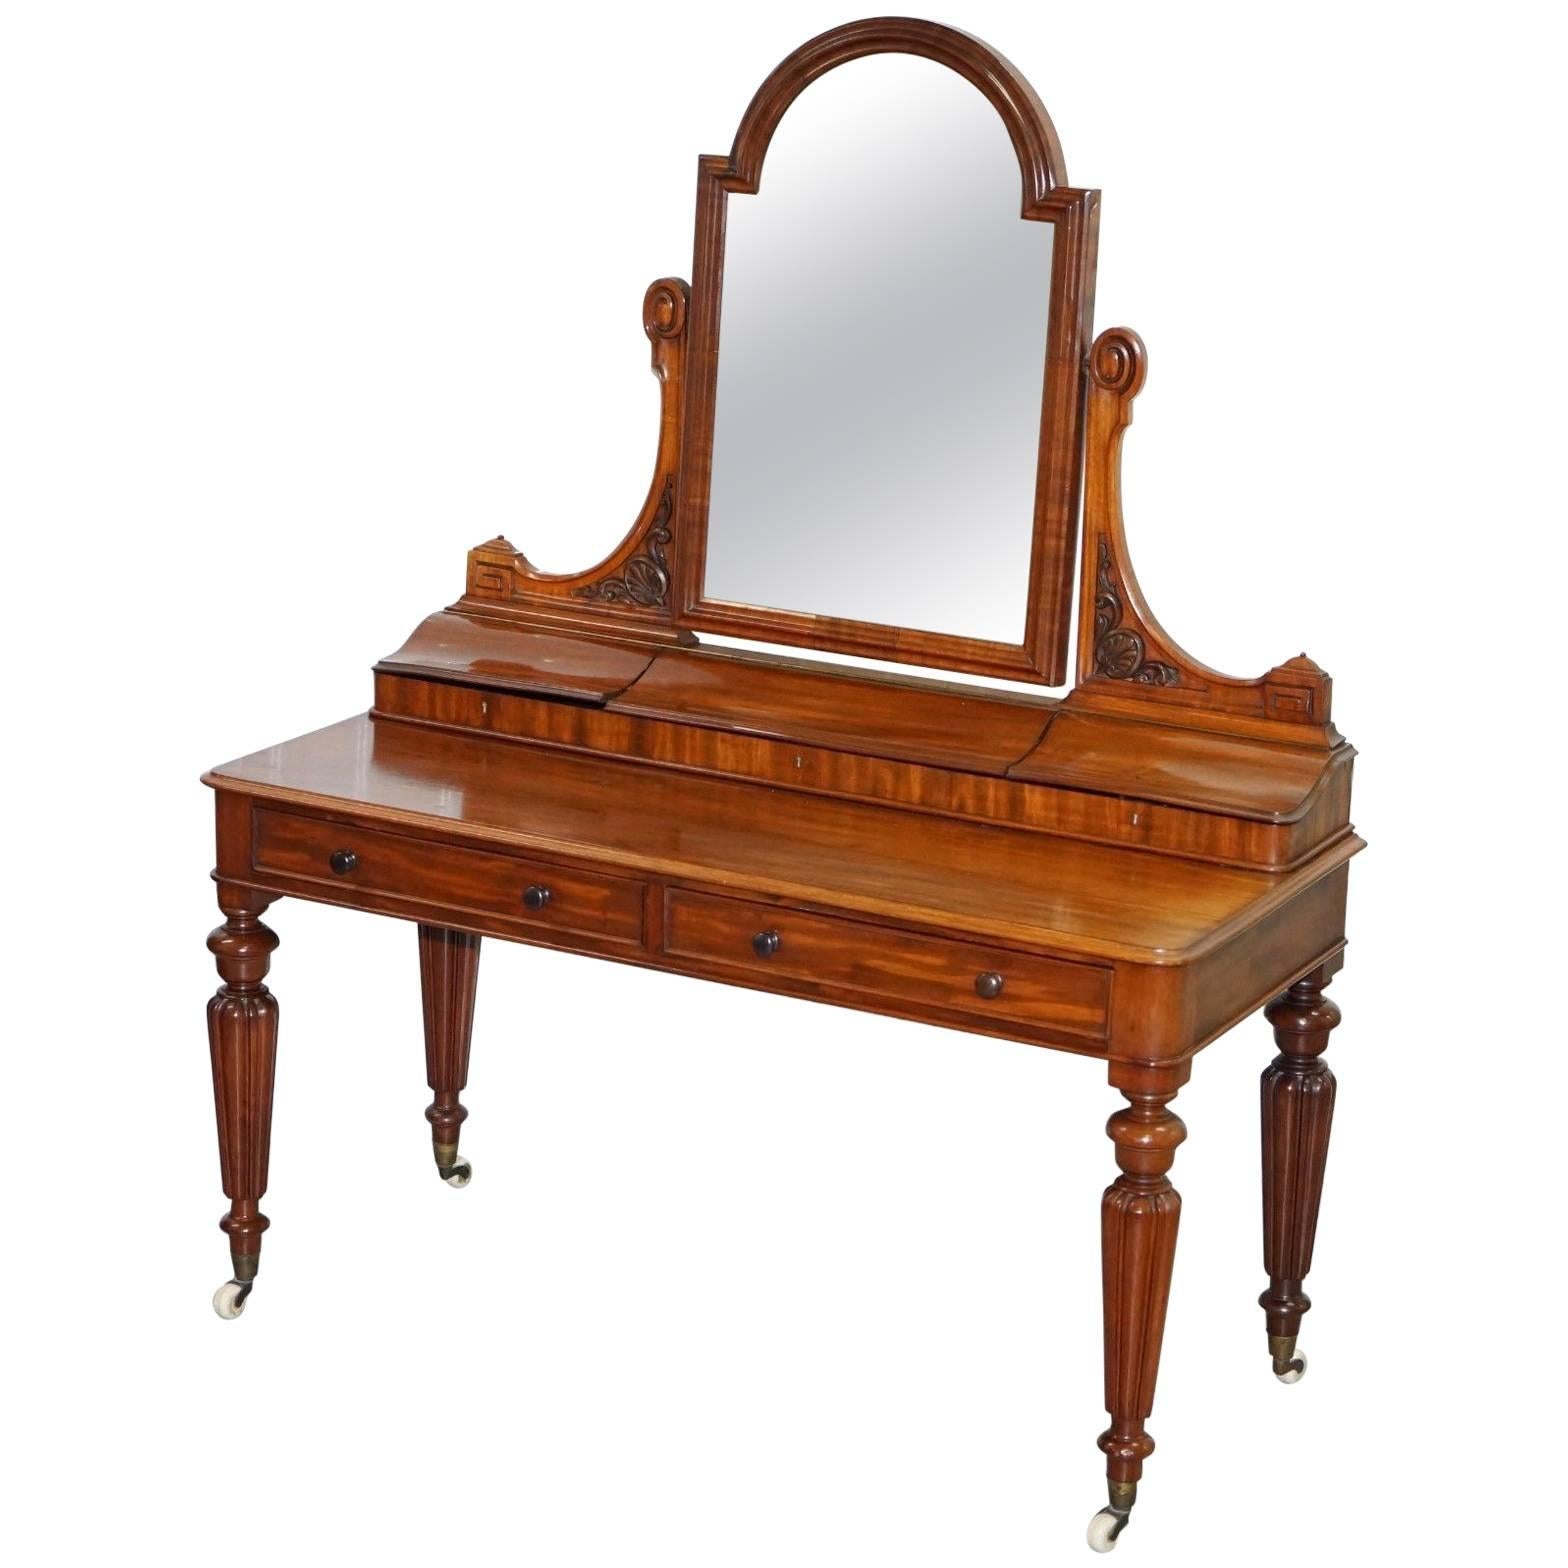 Lovely William IV Mahogany Dressing Table with Gillows Inspired Legs, circa 1830